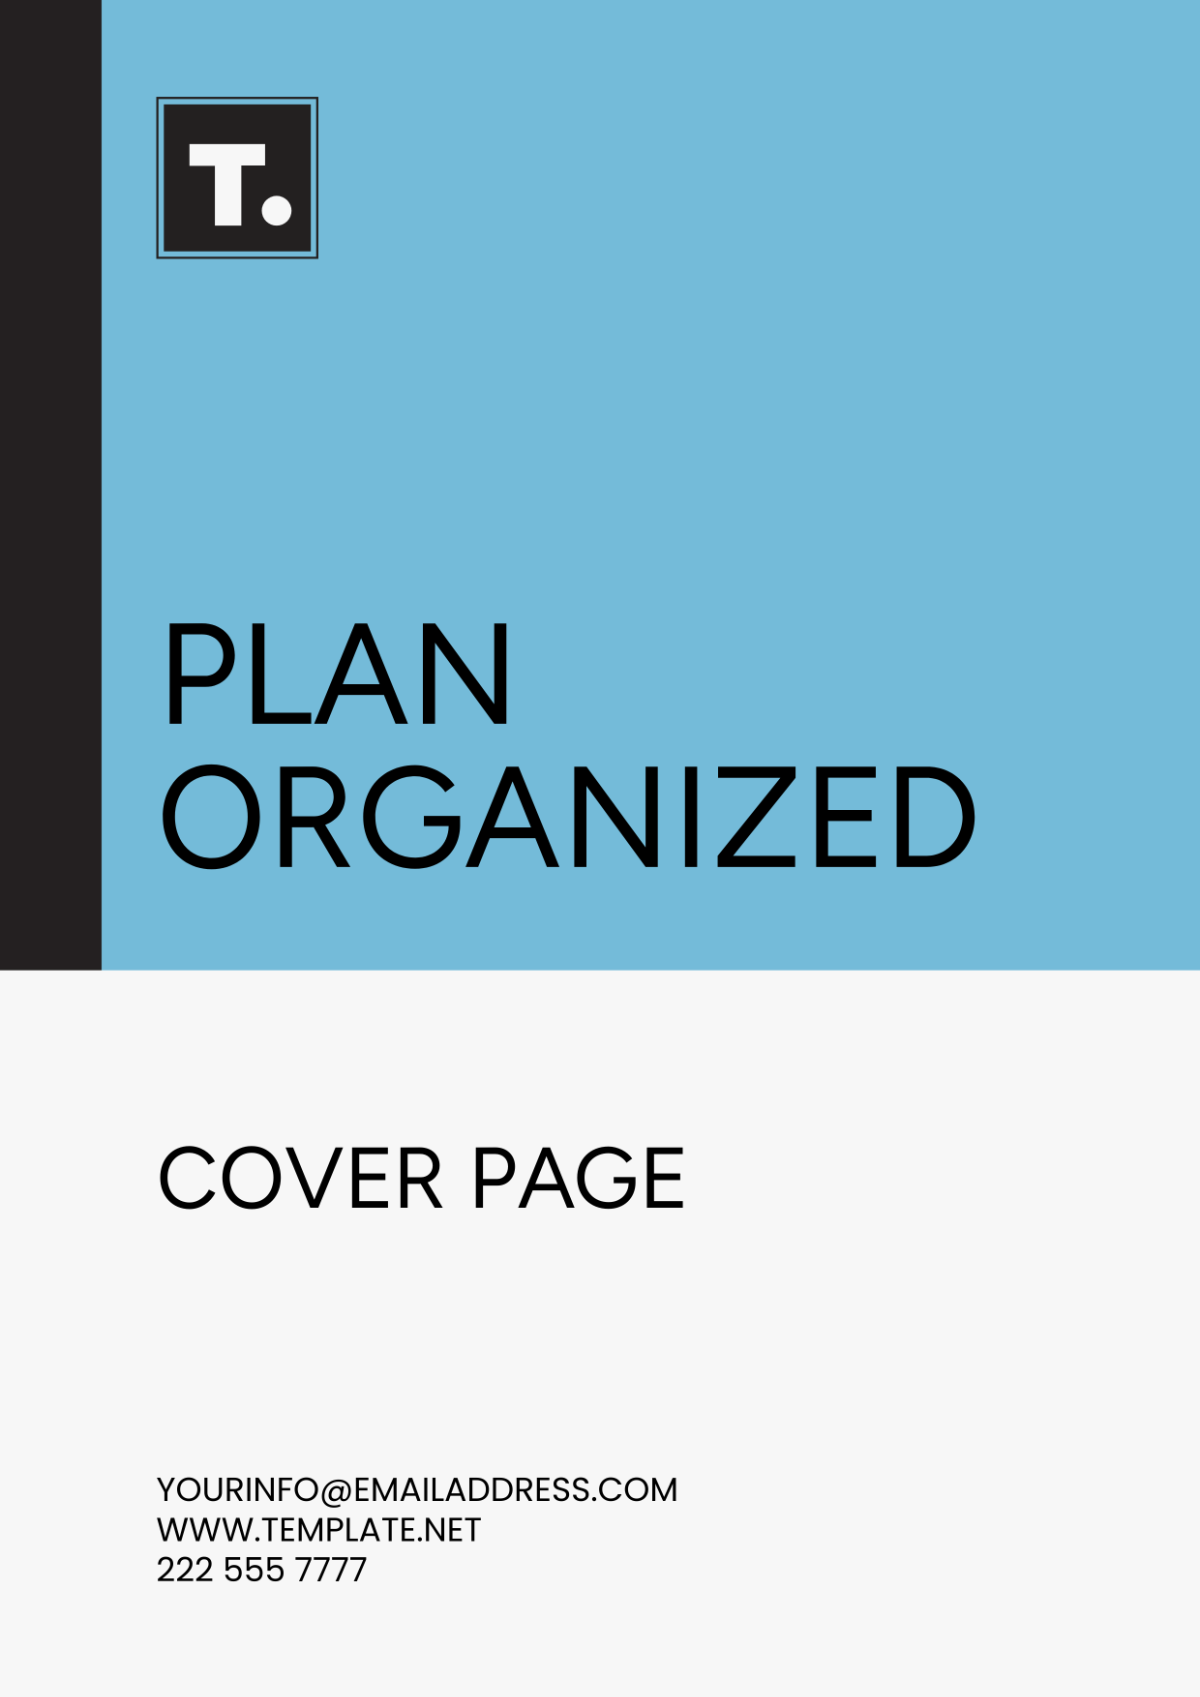 Free Plan Organized Cover Page Template